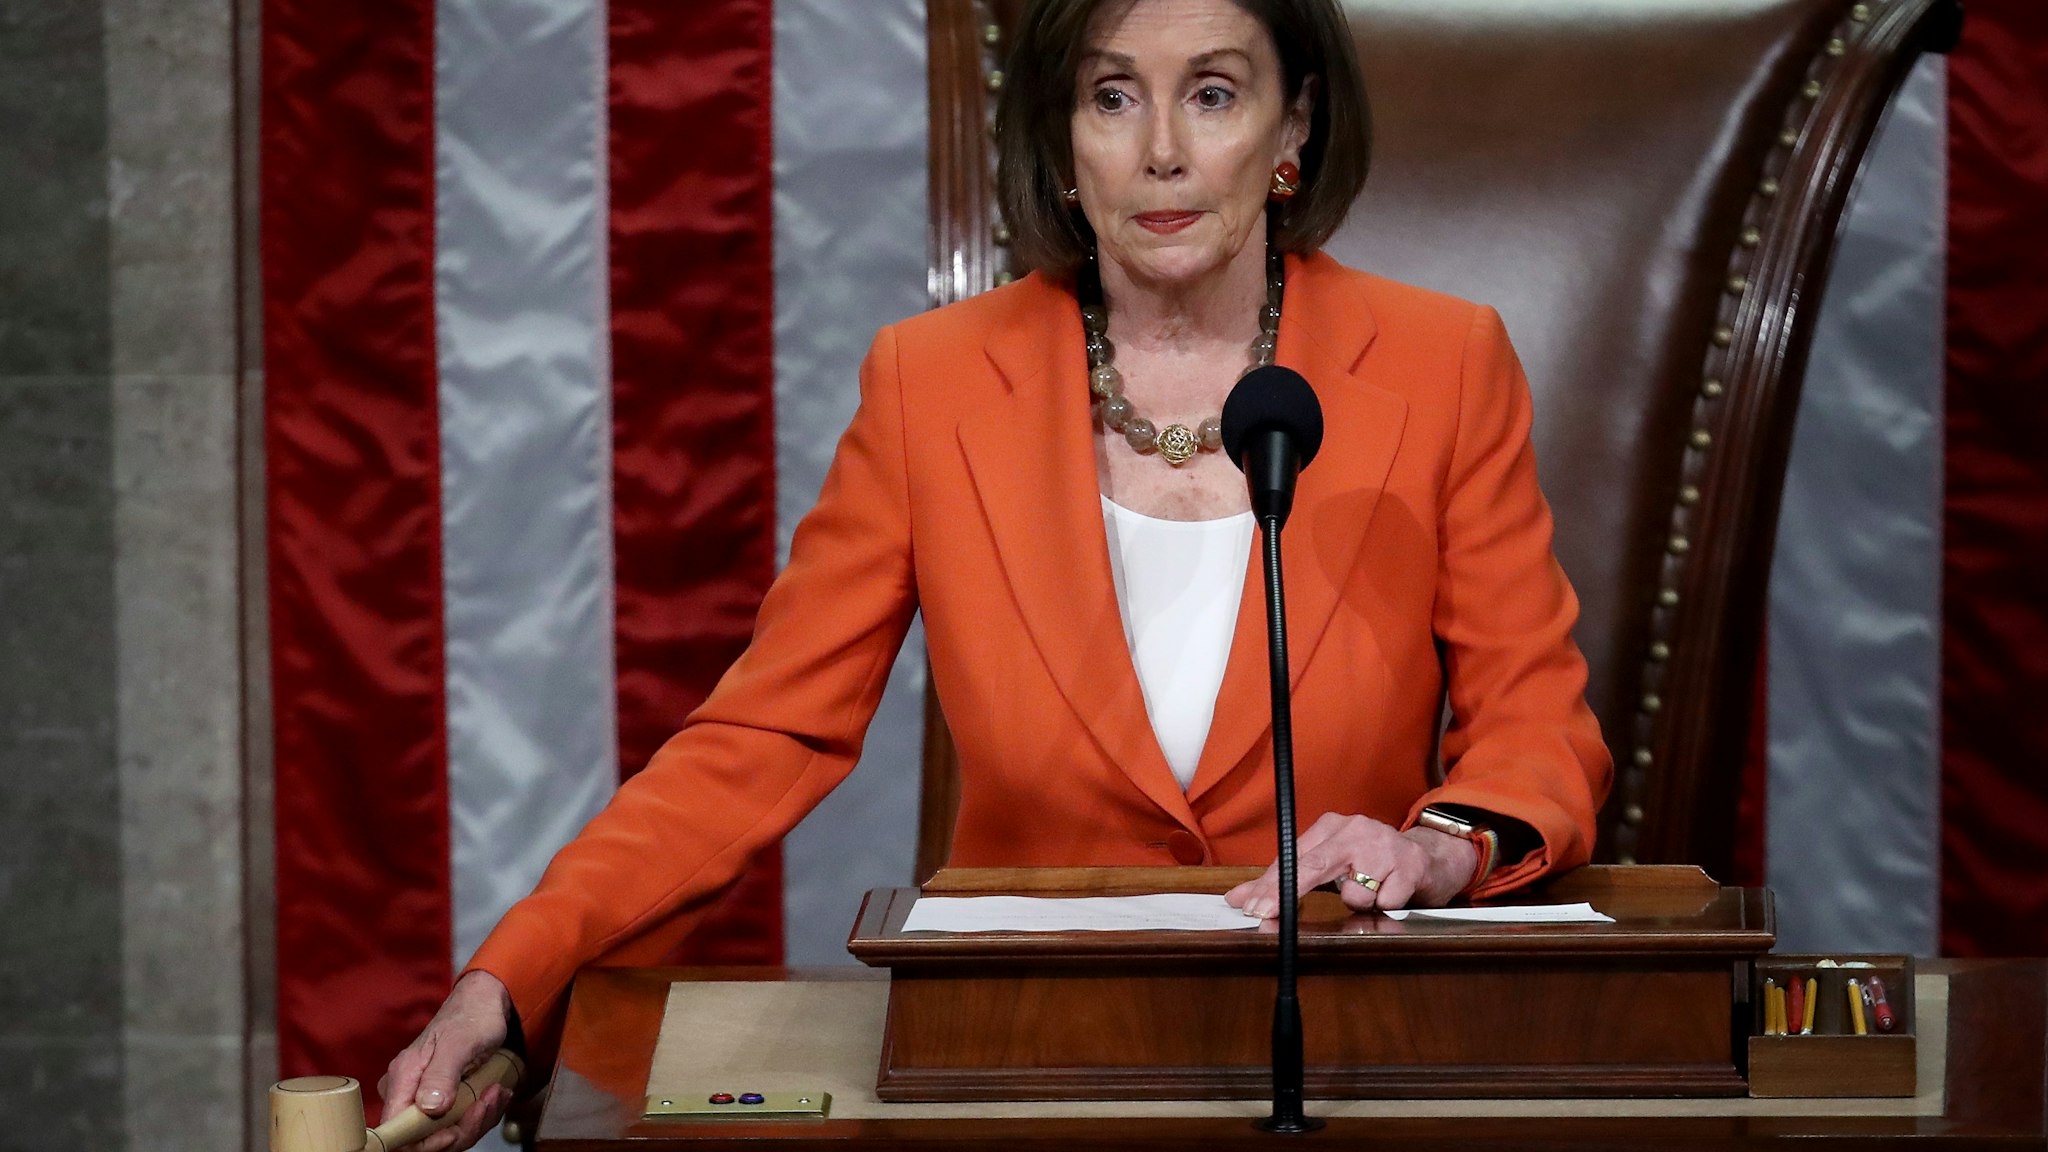 Speaker of the House Nancy Pelosi (D-CA) gavels the close of a vote by the U.S. House of Representatives on a resolution formalizing the impeachment inquiry centered on U.S. President Donald Trump October 31, 2019 in Washington, DC. The resolution, passed by a vote of 232-196, creates the legal framework for public hearings, procedures for the White House to respond to evidence and the process for consideration of future articles of impeachment by the full House of Representatives. (Photo by Win McNamee/Getty Images)